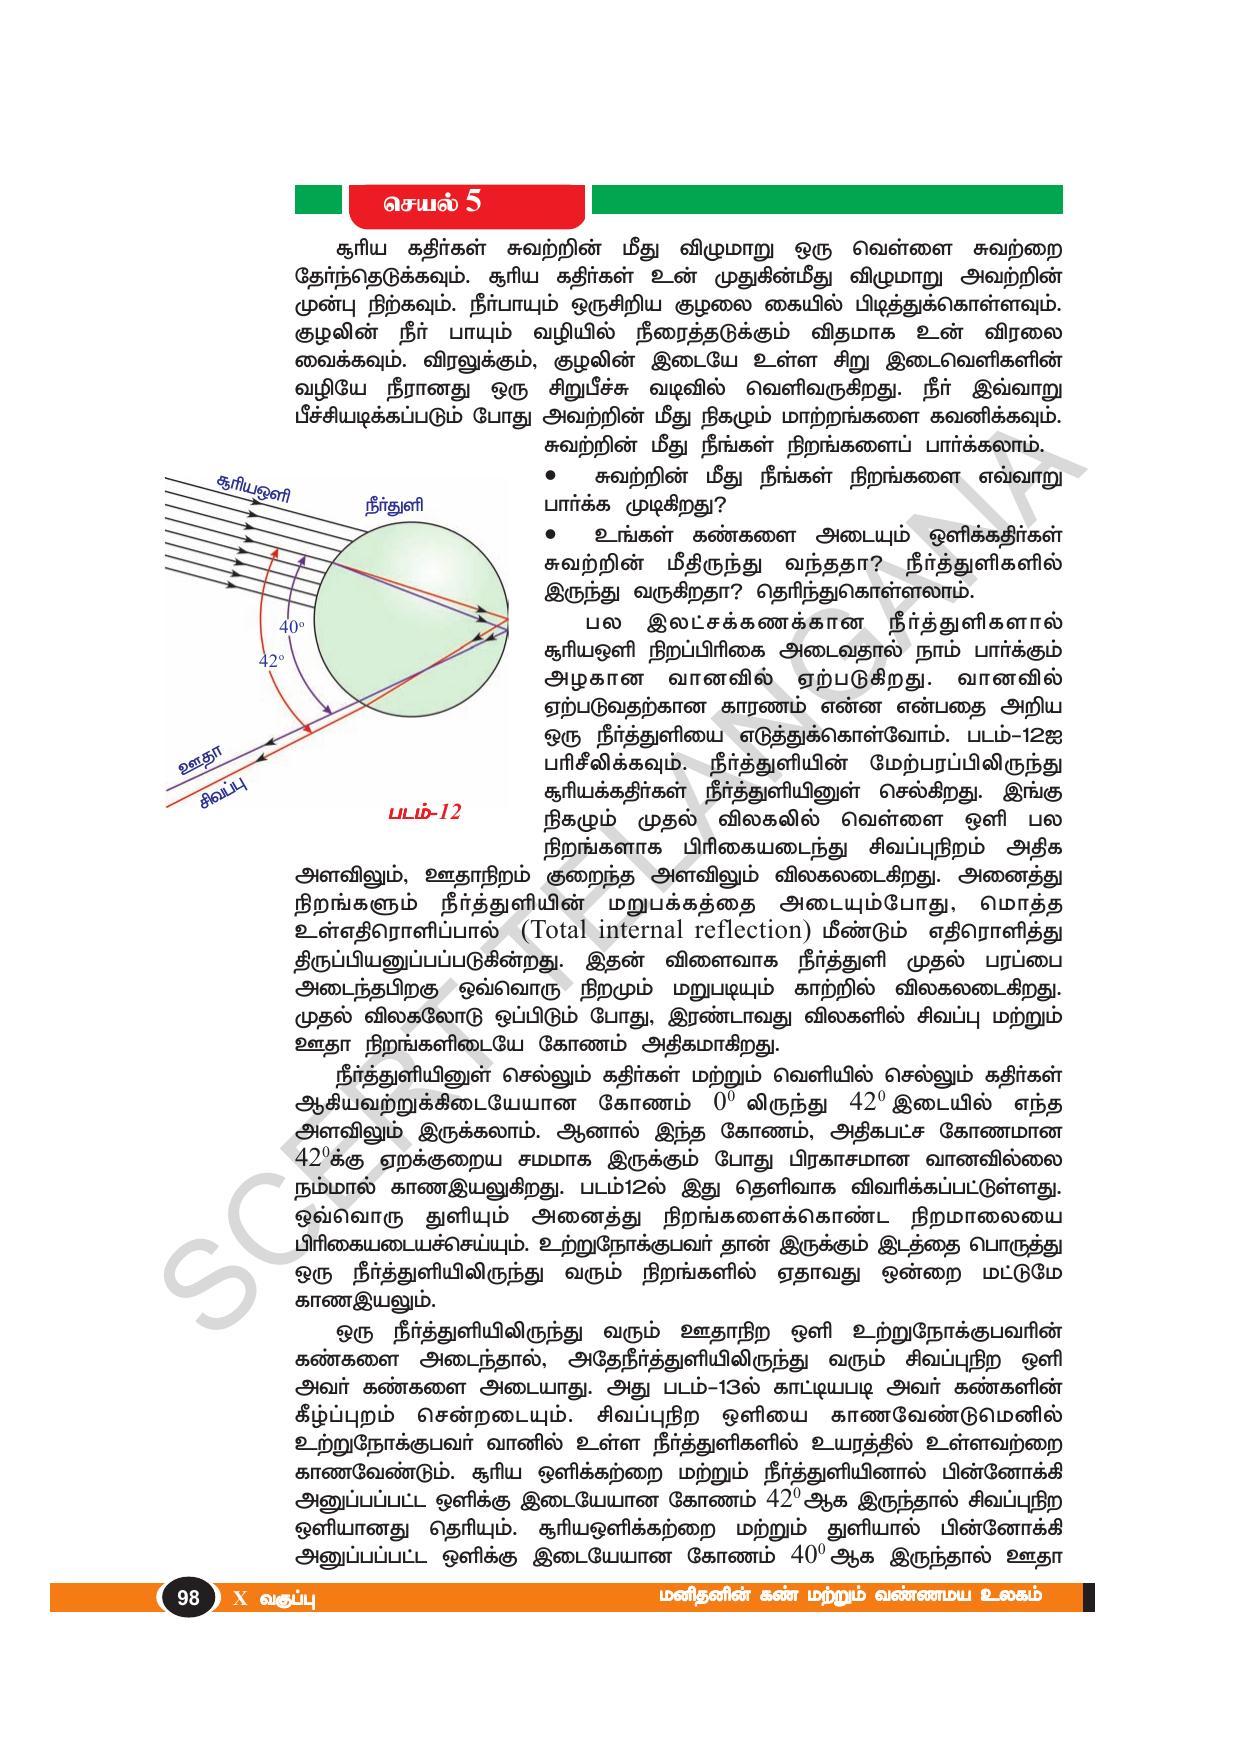 TS SCERT Class 10 Physical Science(Tamil Medium) Text Book - Page 110